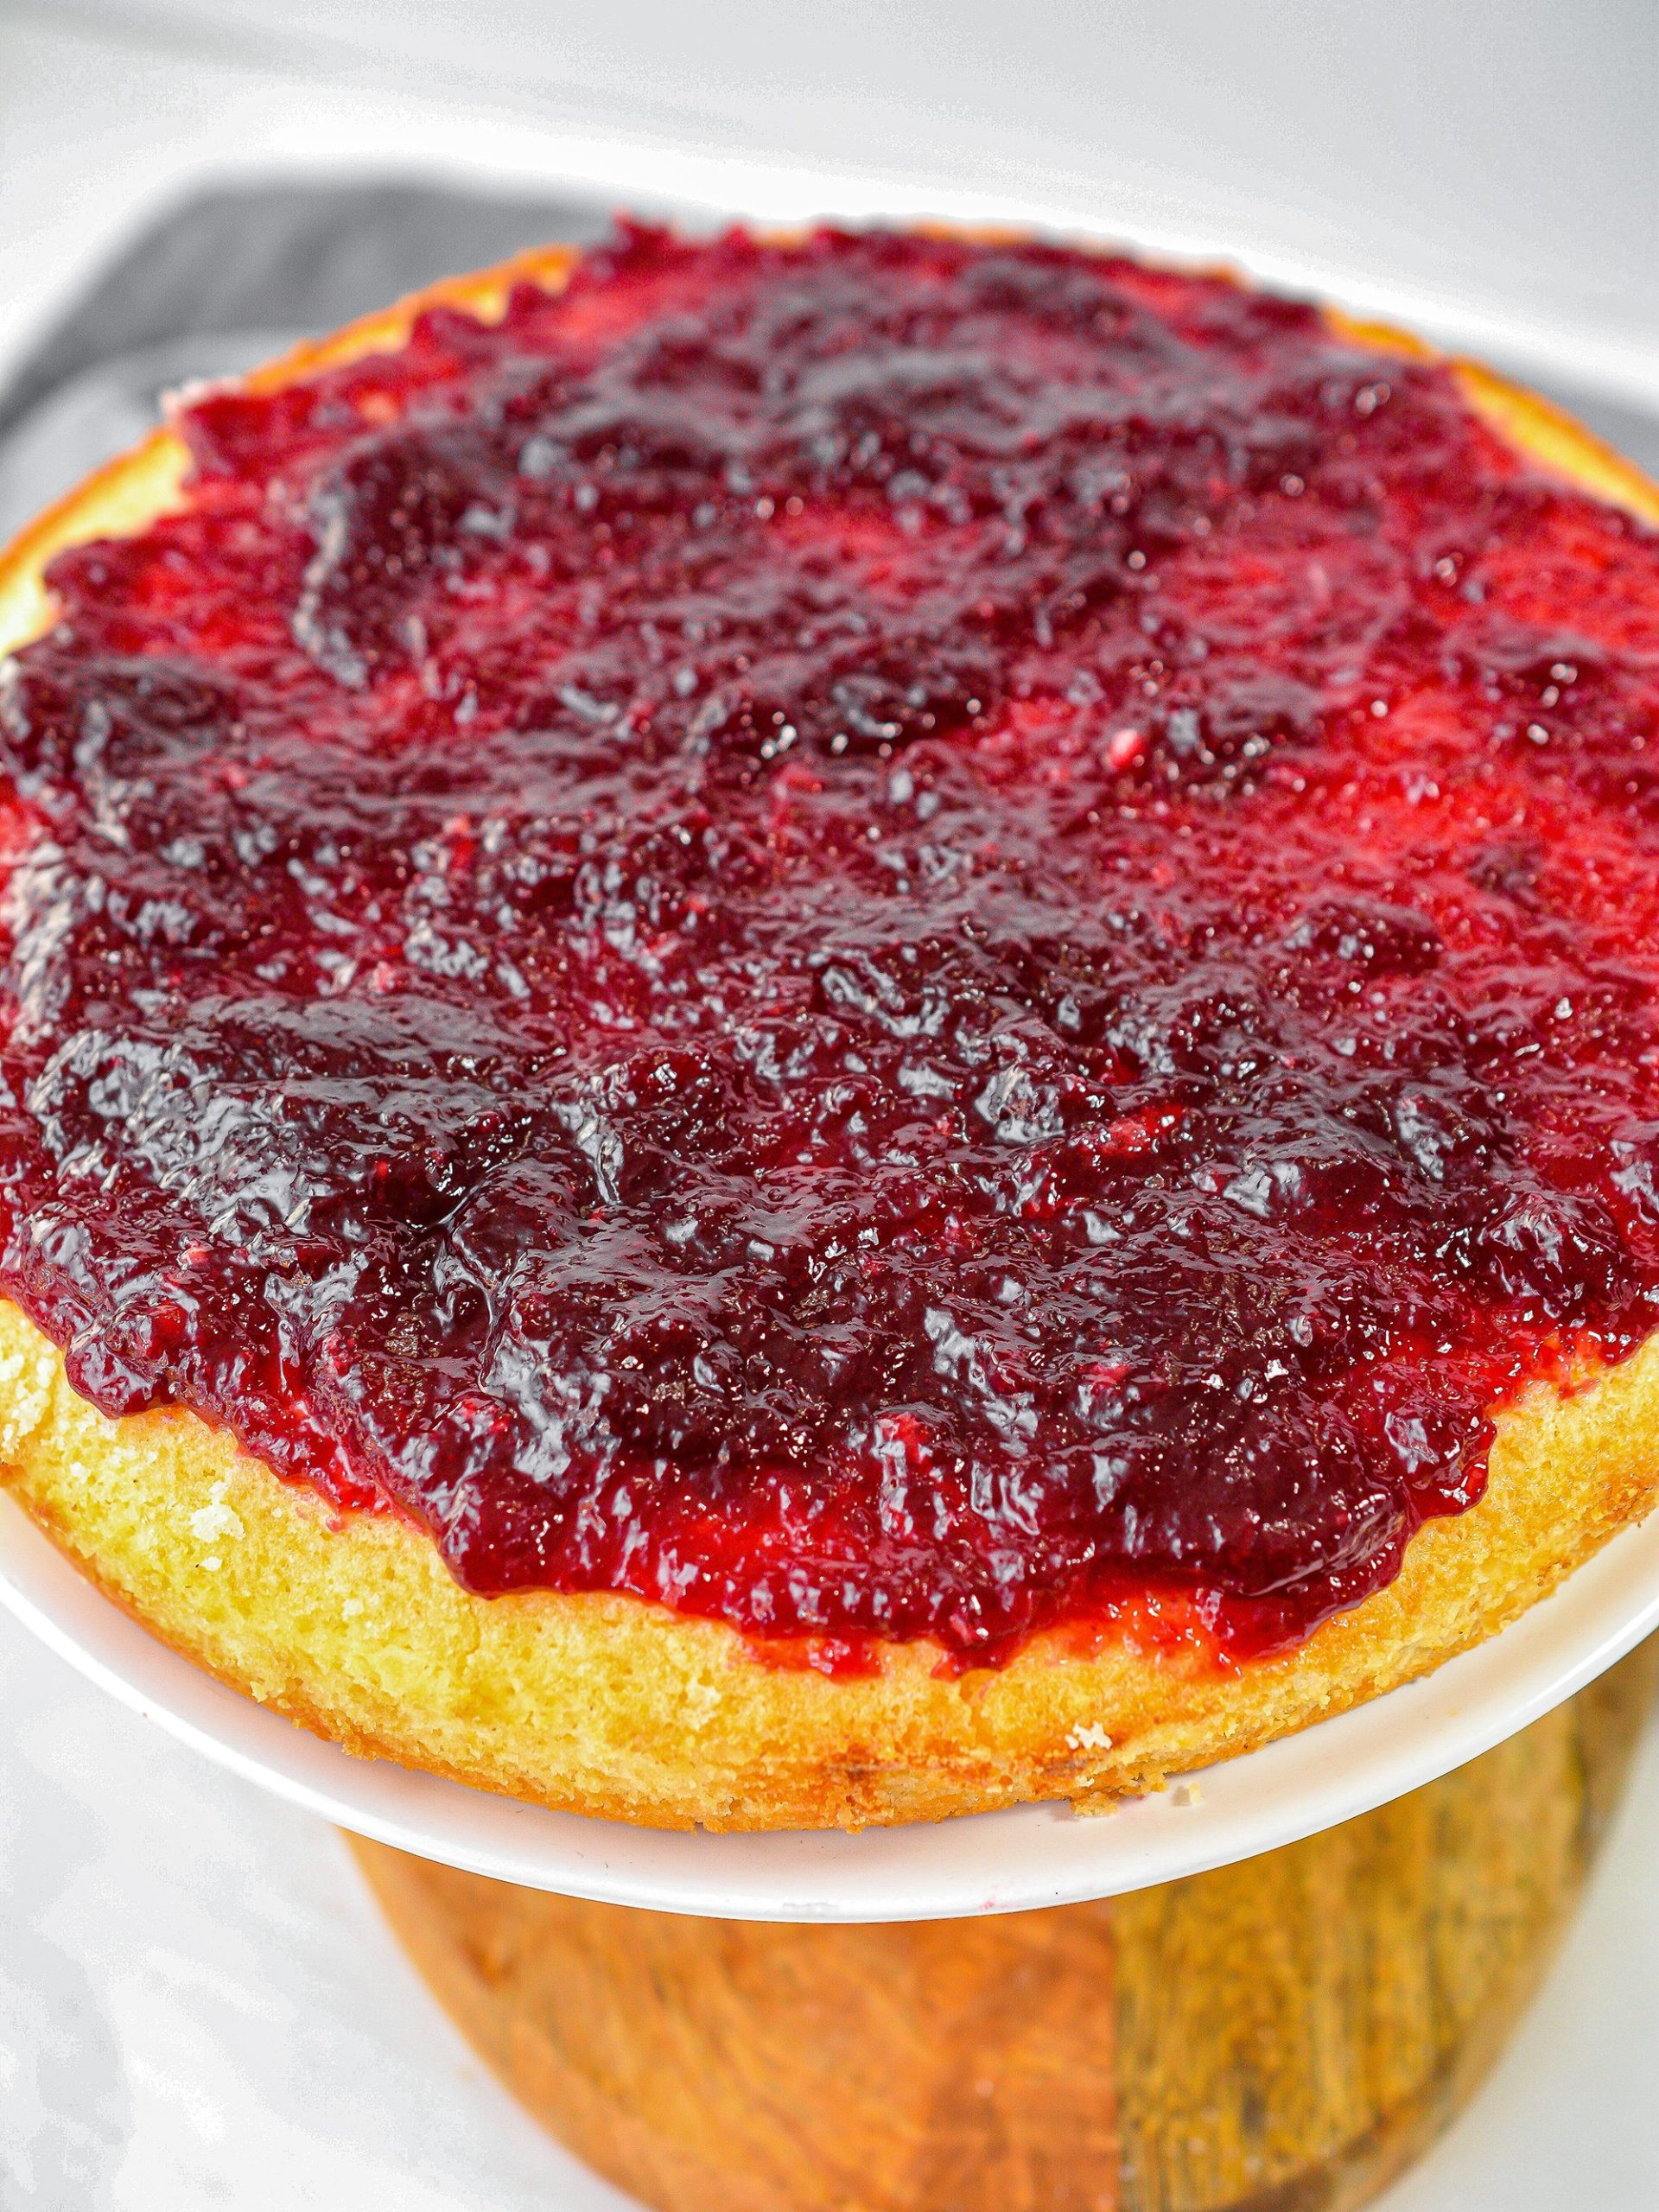 Top the layer of cake with a layer of raspberry preserves.